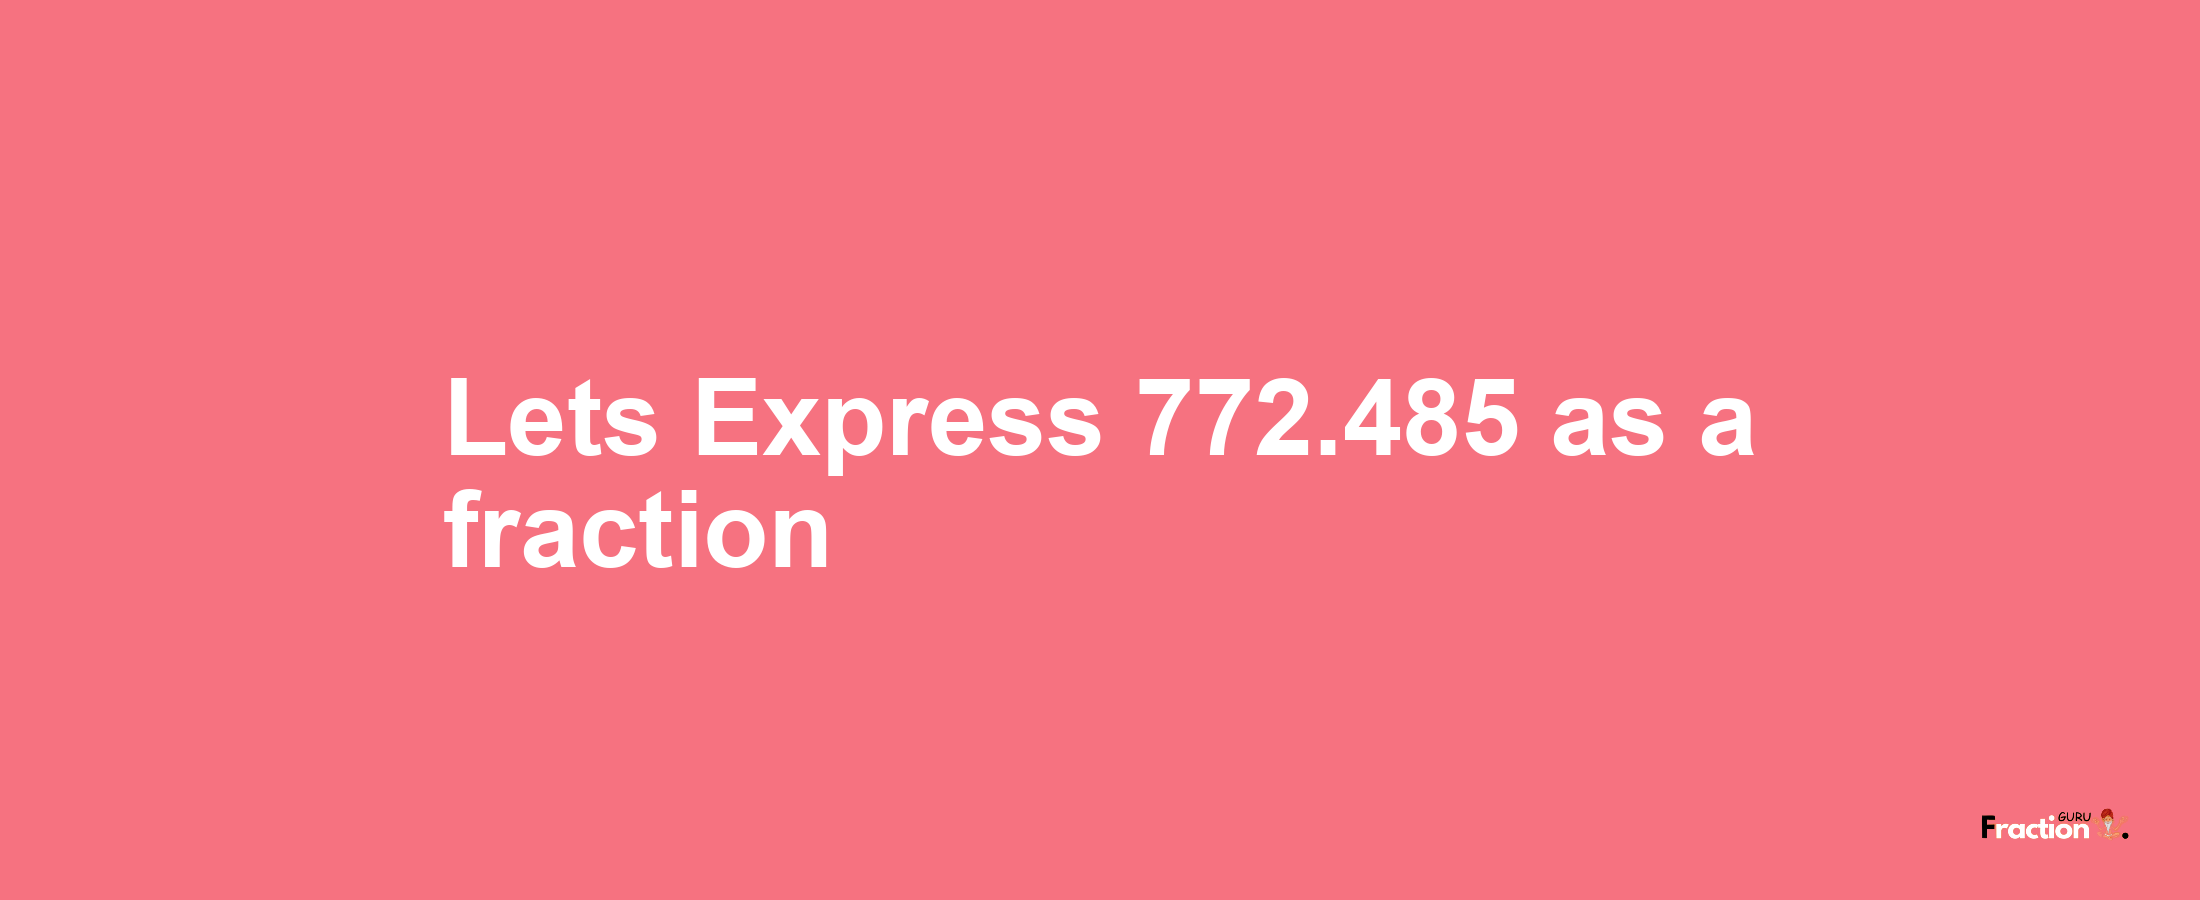 Lets Express 772.485 as afraction